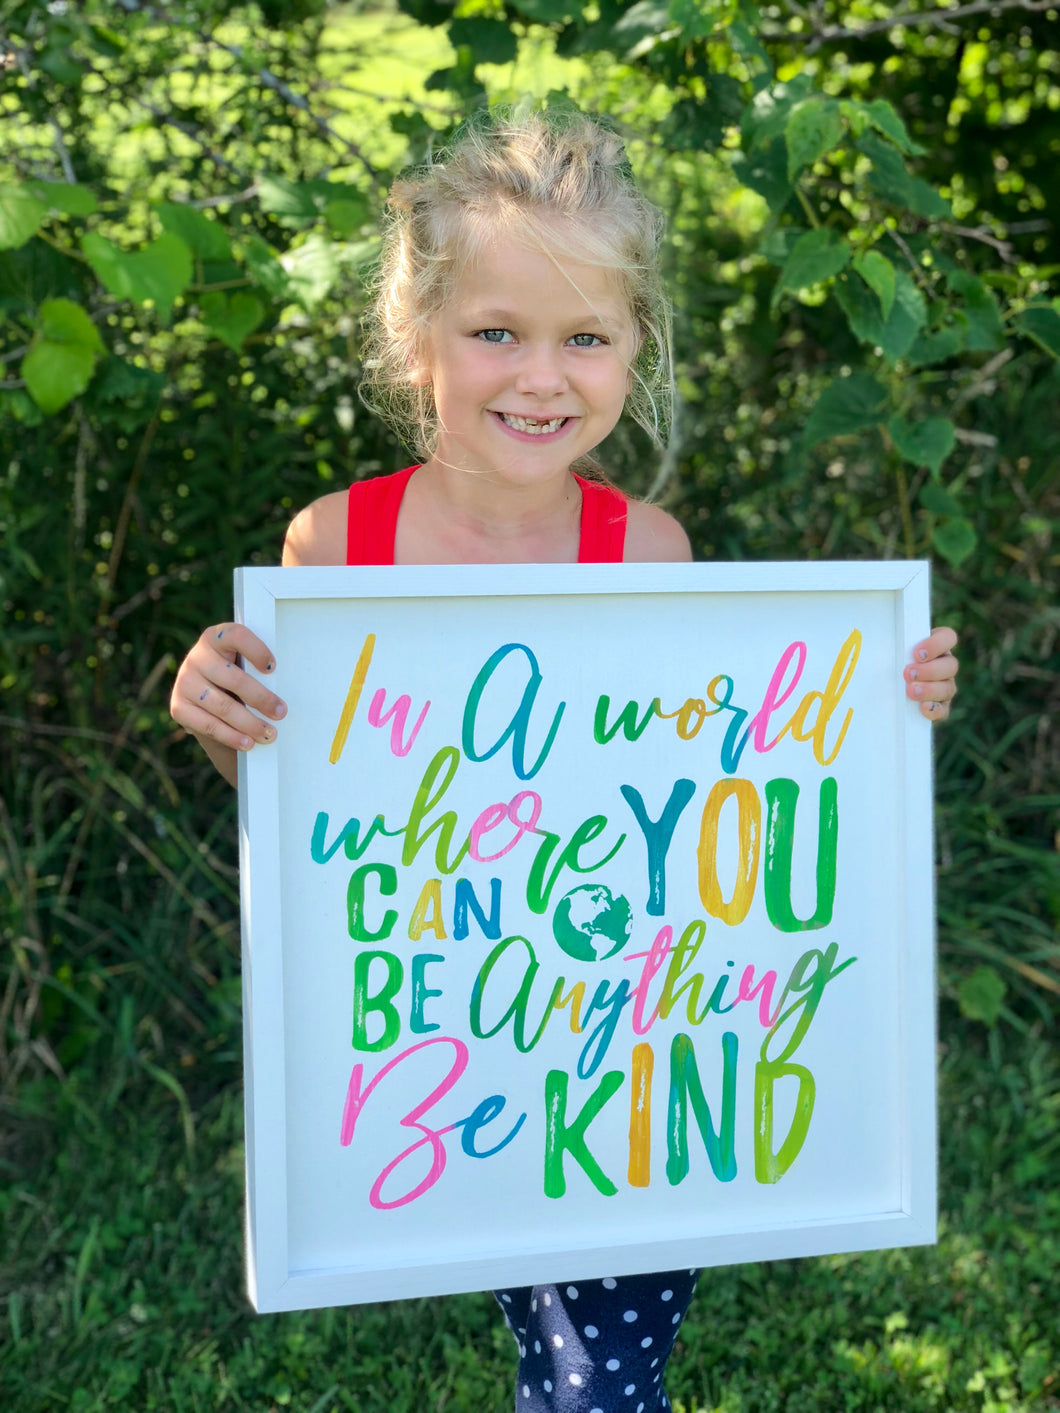 IN A WORLD WHERE YOU CAN BE ANYTHING, BE KIND